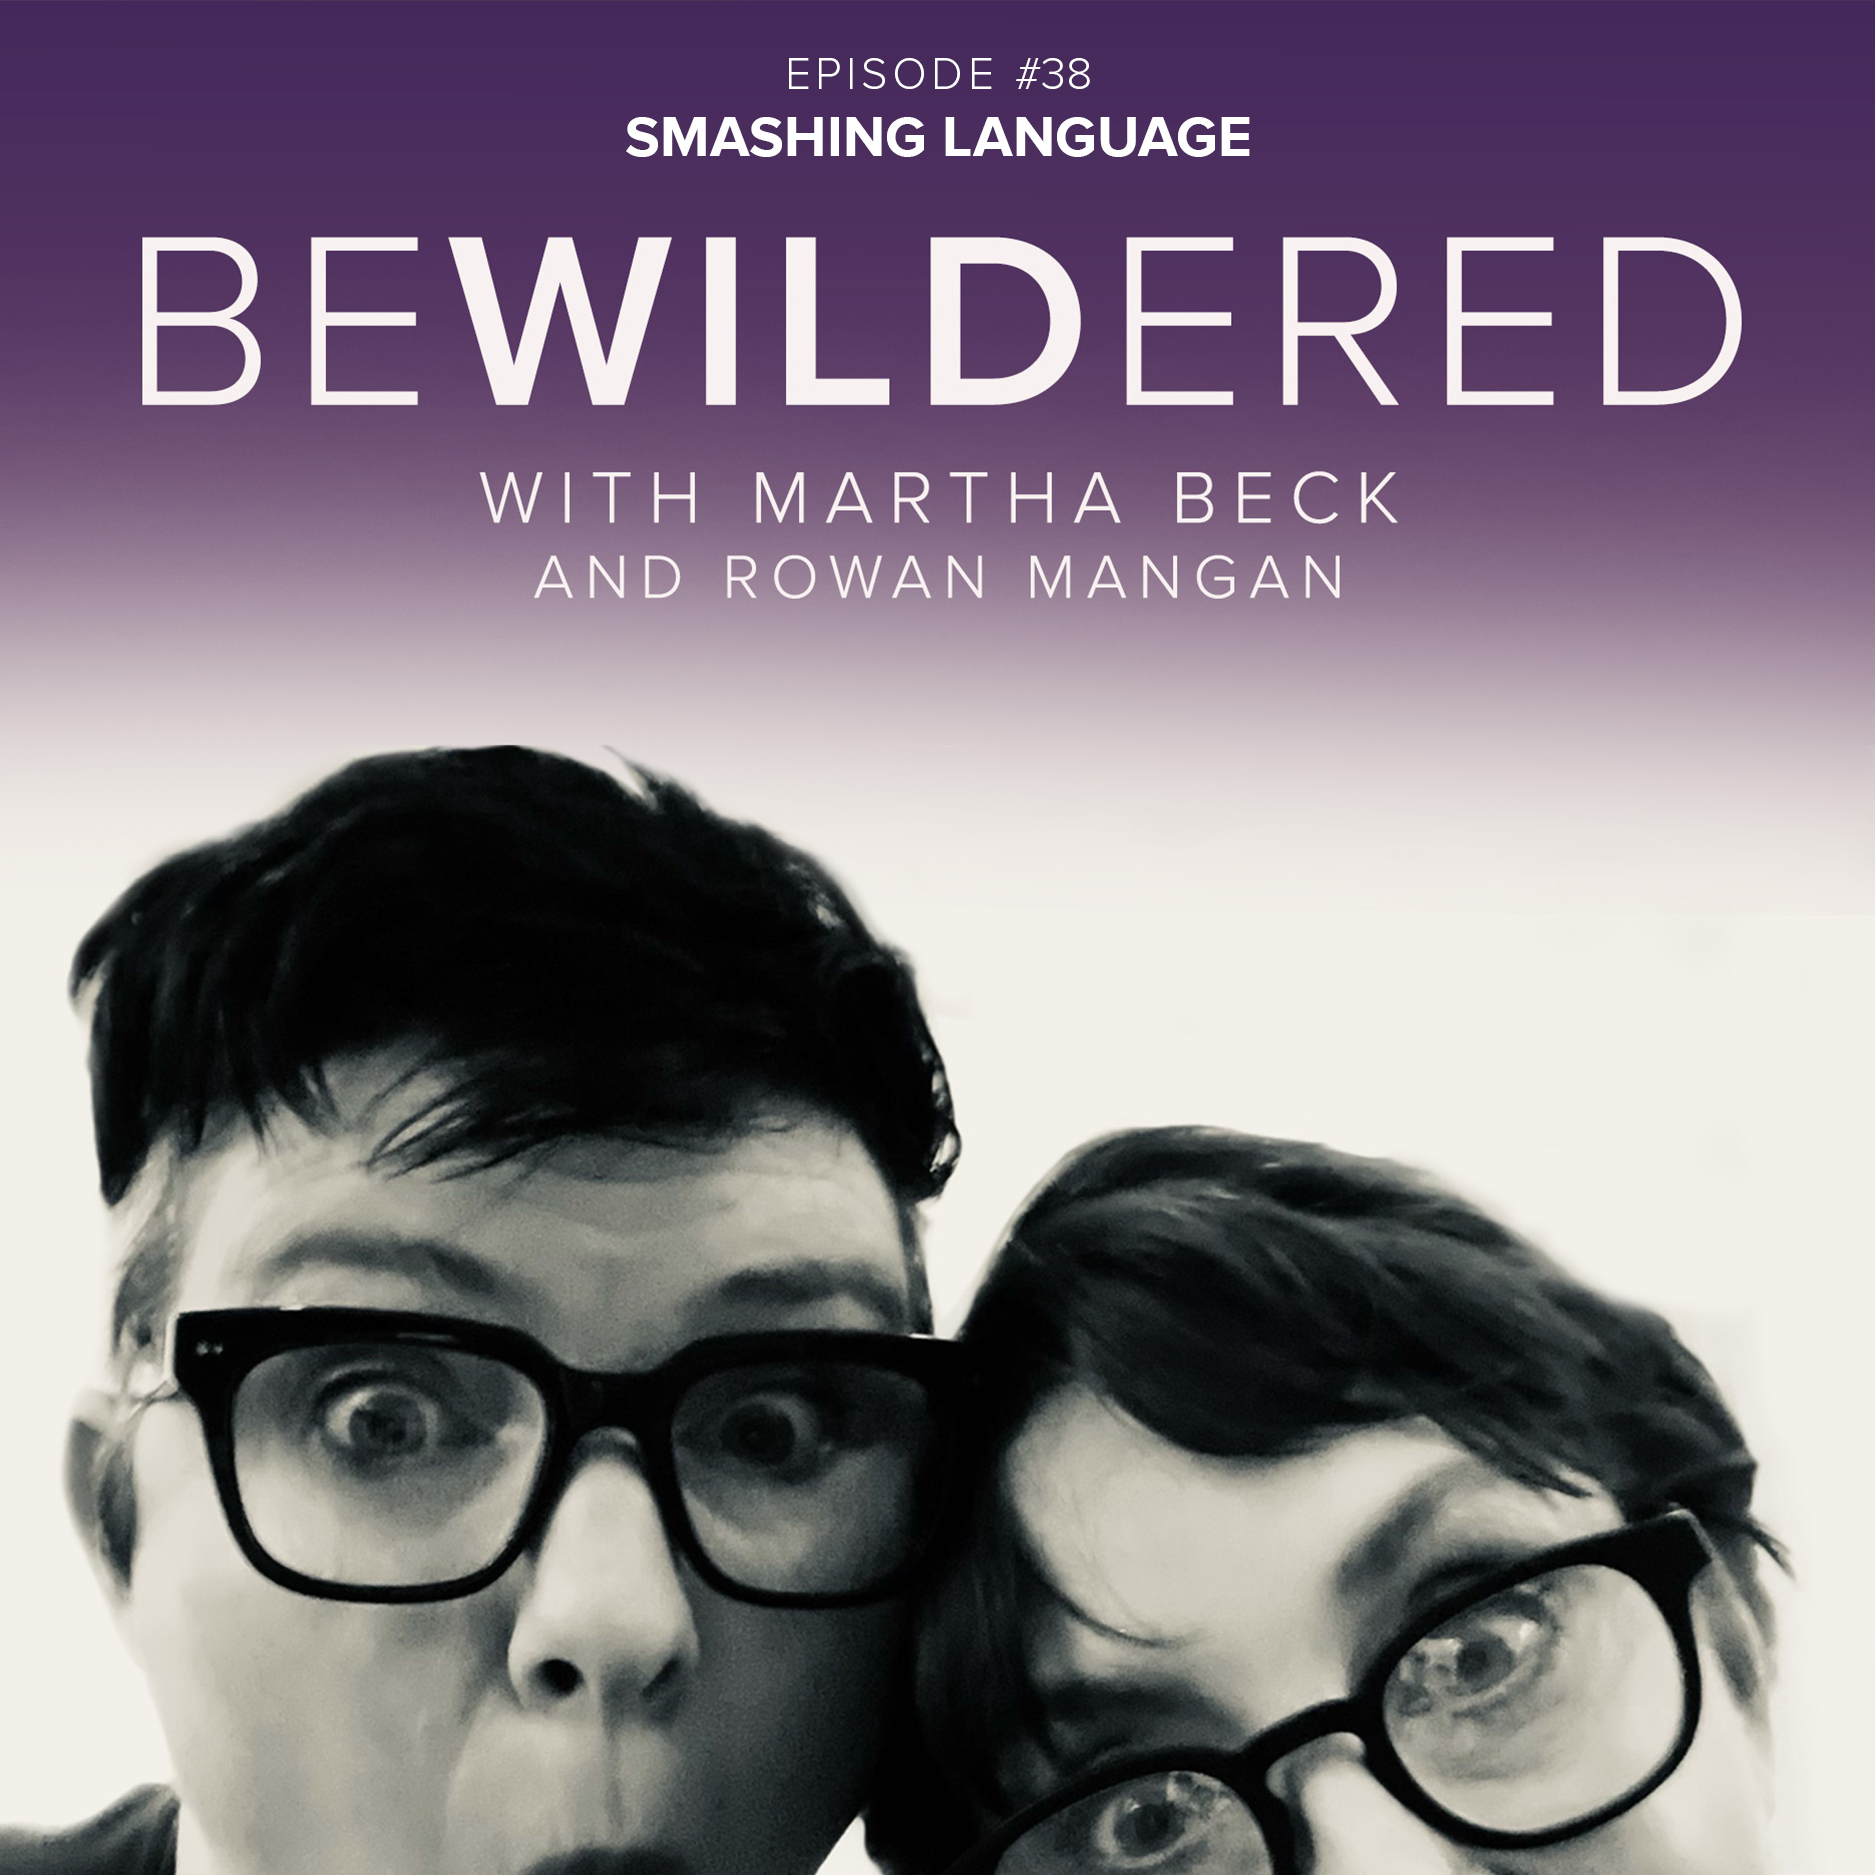 Image for Episode #38 Smashing Language for the Bewildered Podcast with Martha Beck and Rowan Mangan